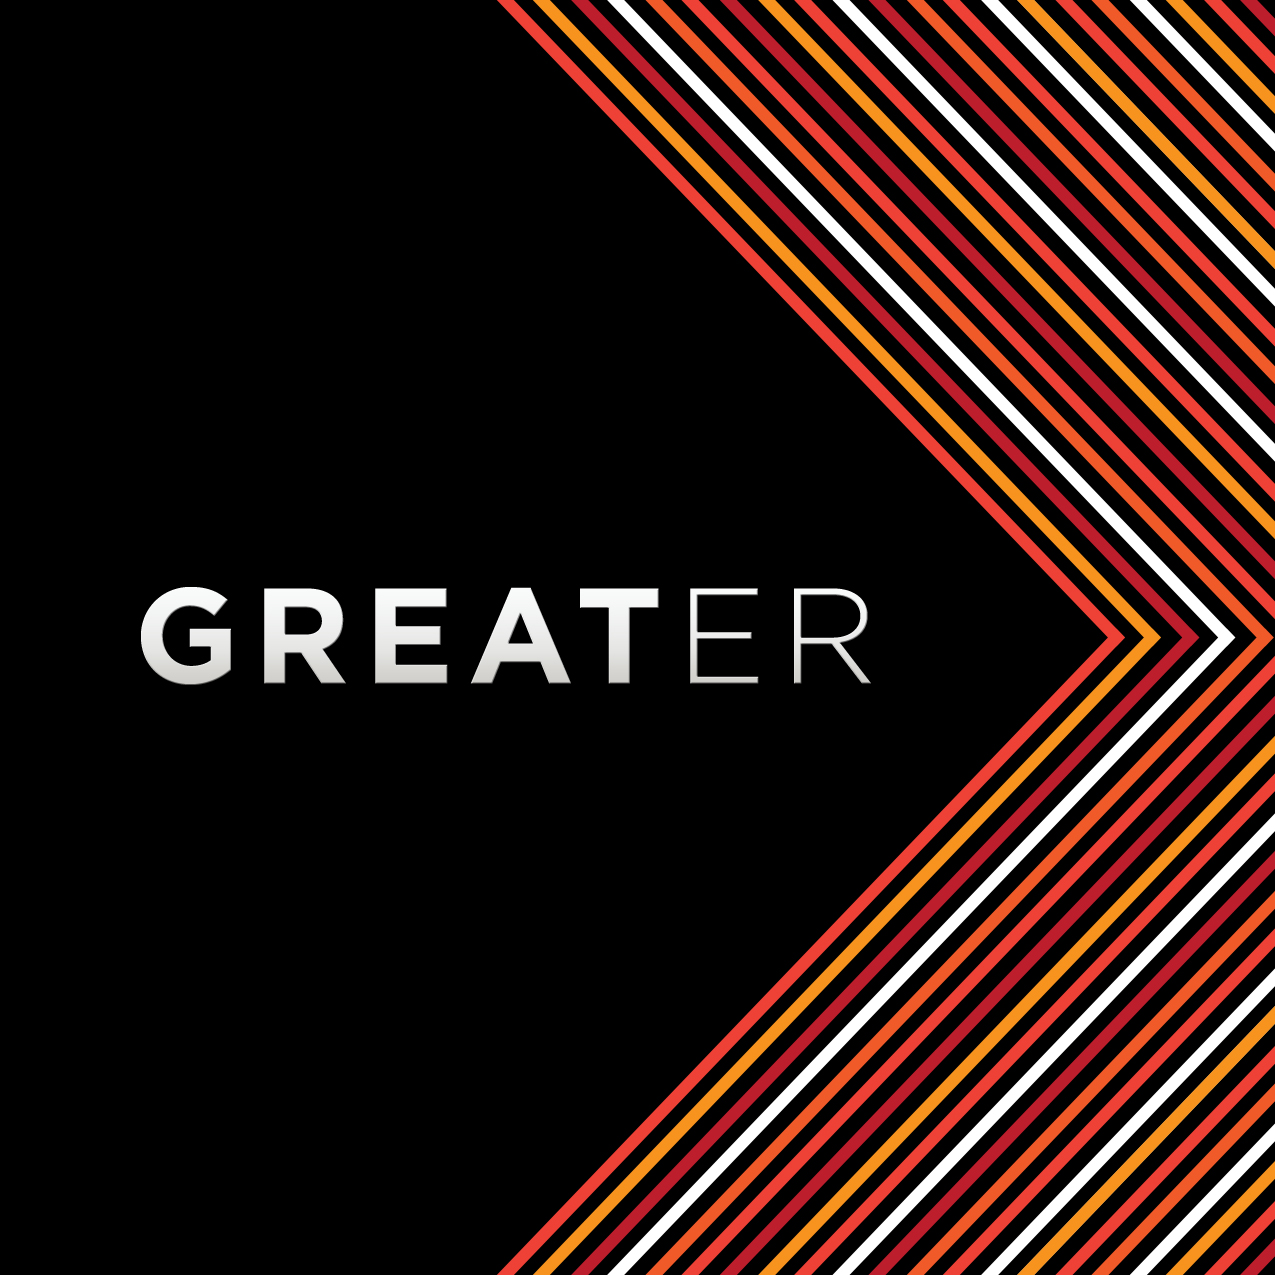 GREATER: Burn Your Plows